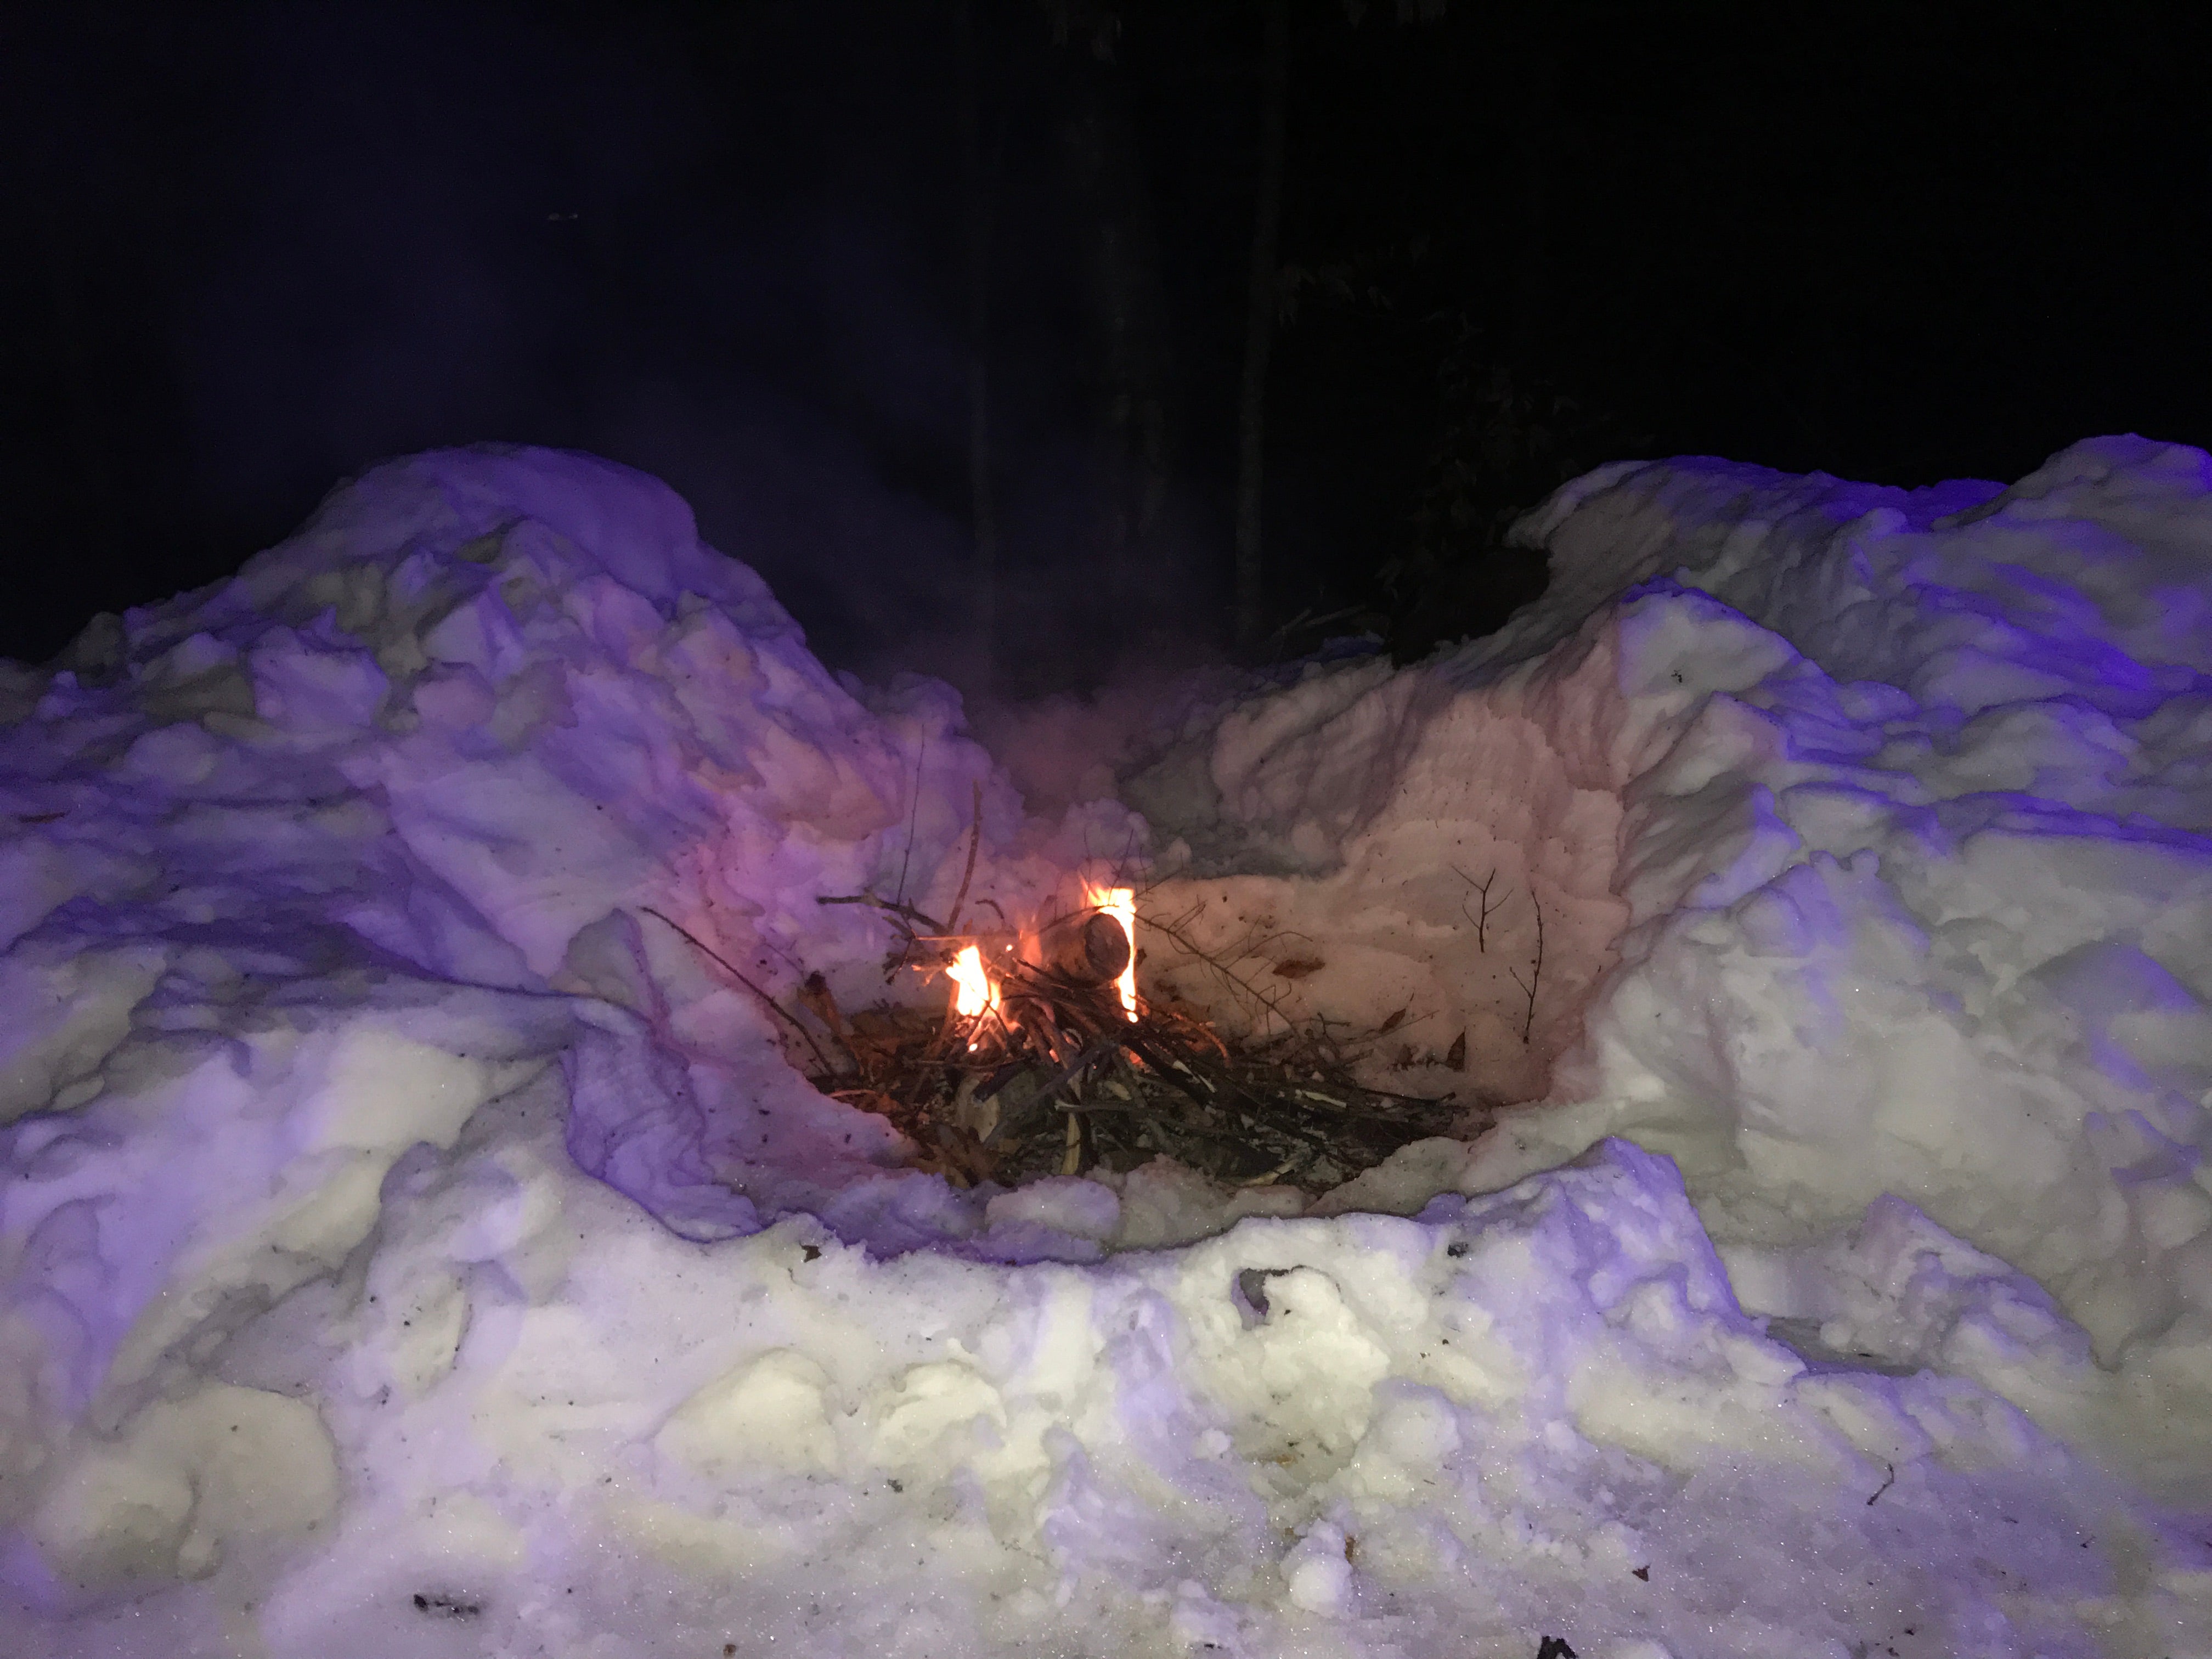 Yes, campfire in the snow